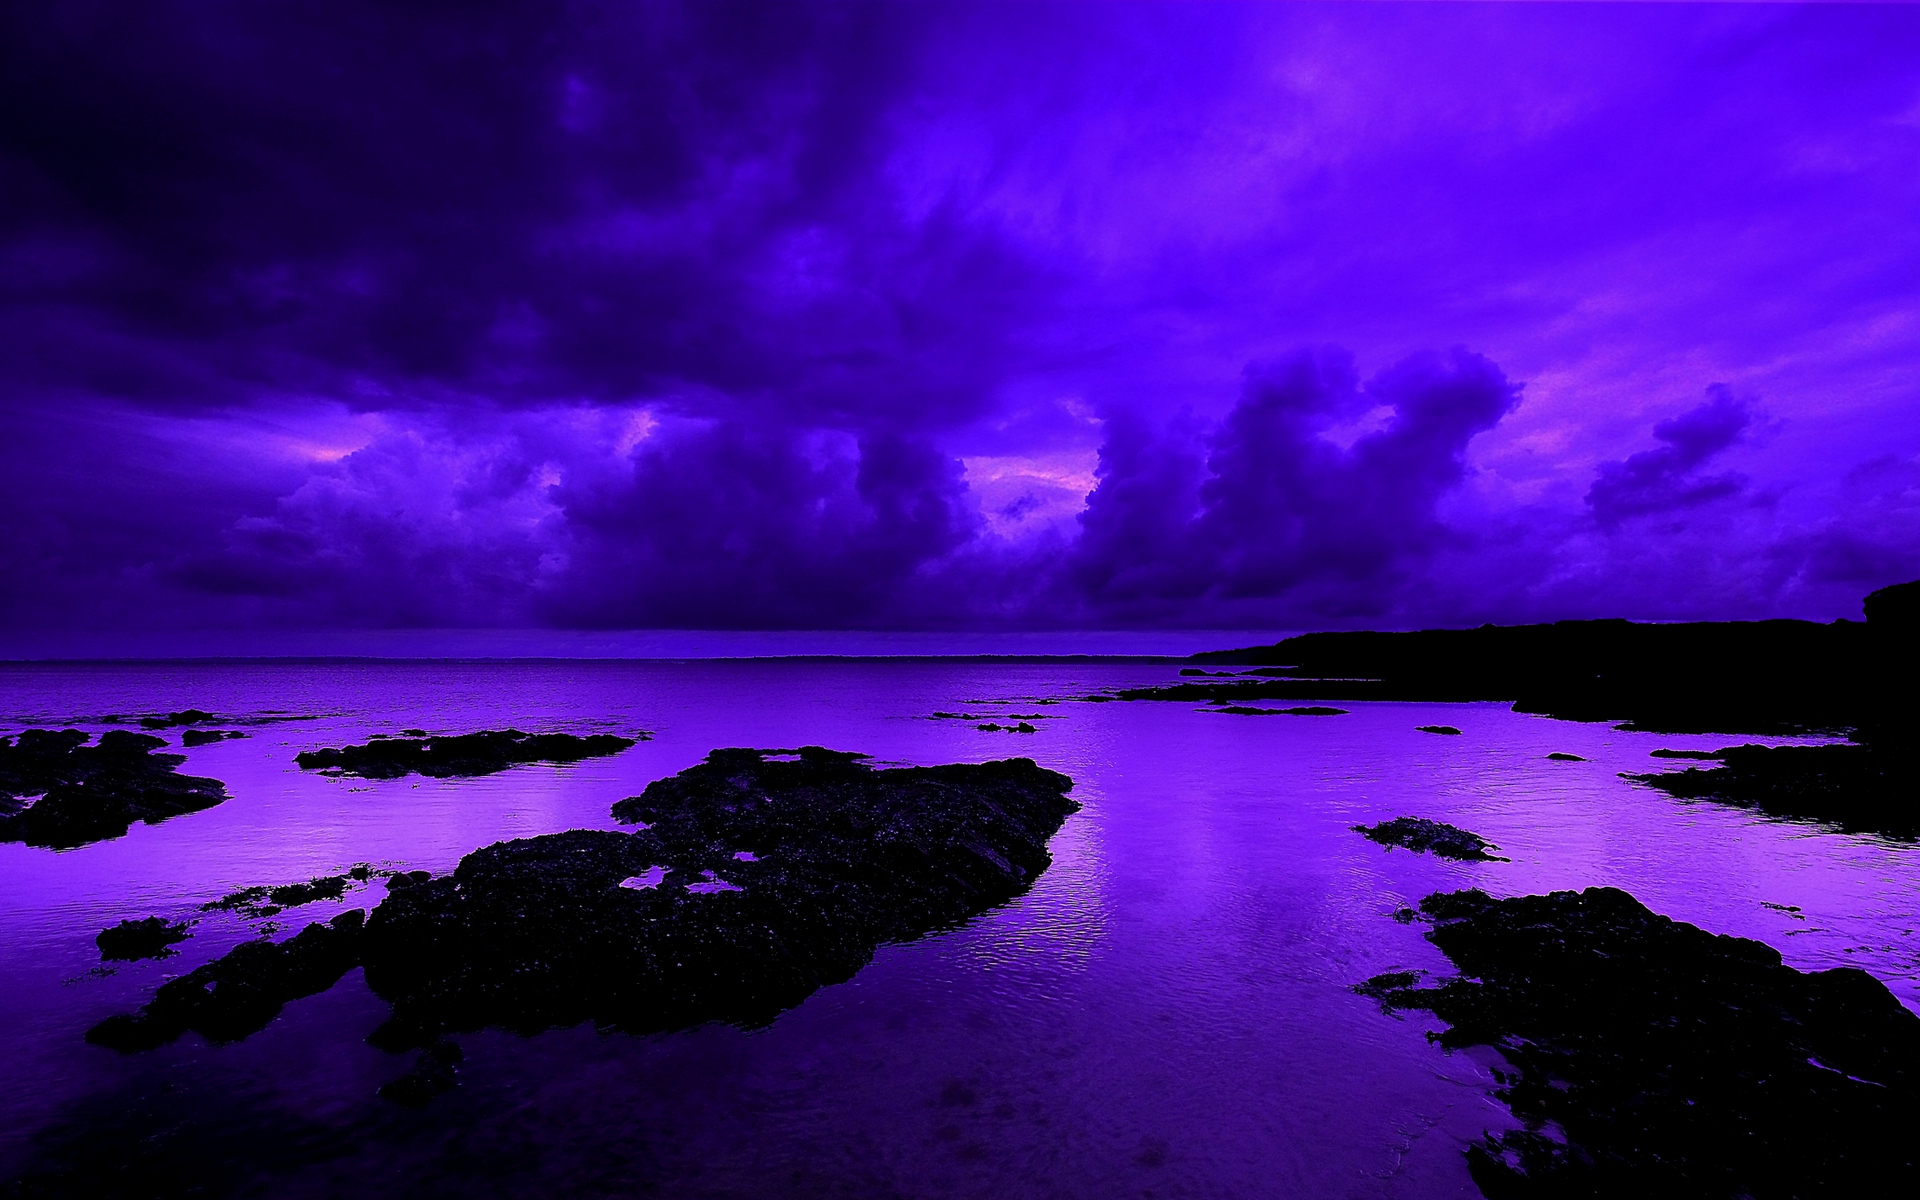 wallpapers hd high quality,sky,violet,nature,purple,blue